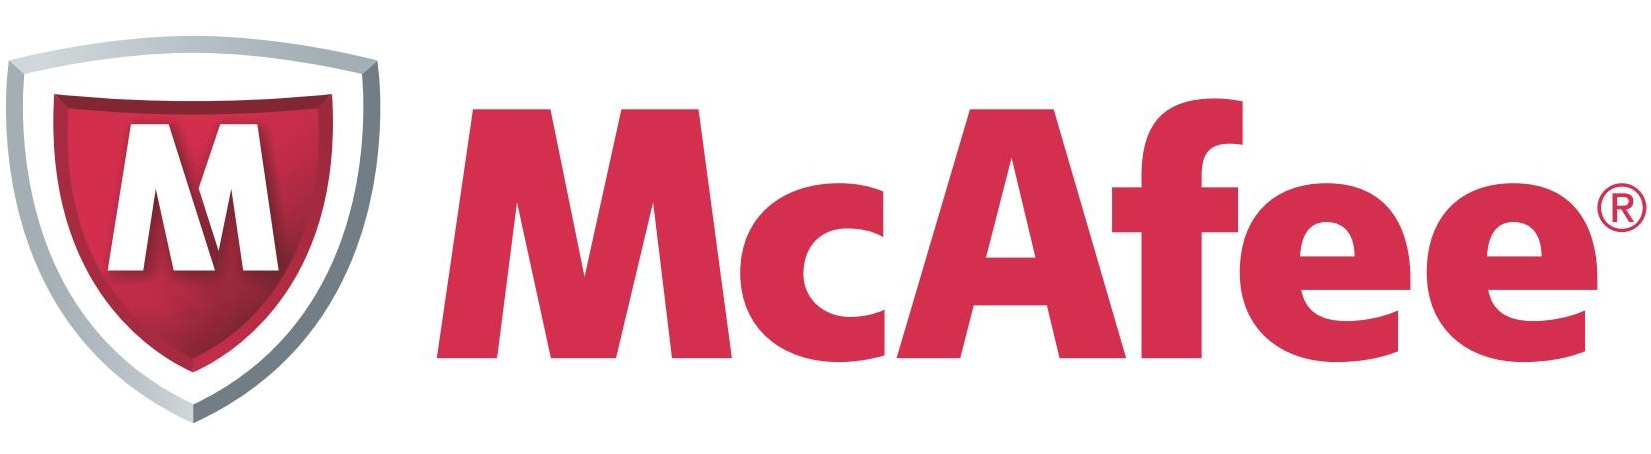 McAfee Network Threat Response CADS Add Connector With 1 year Gold Software Support - Subscription Licence - 1 License - 1 Year